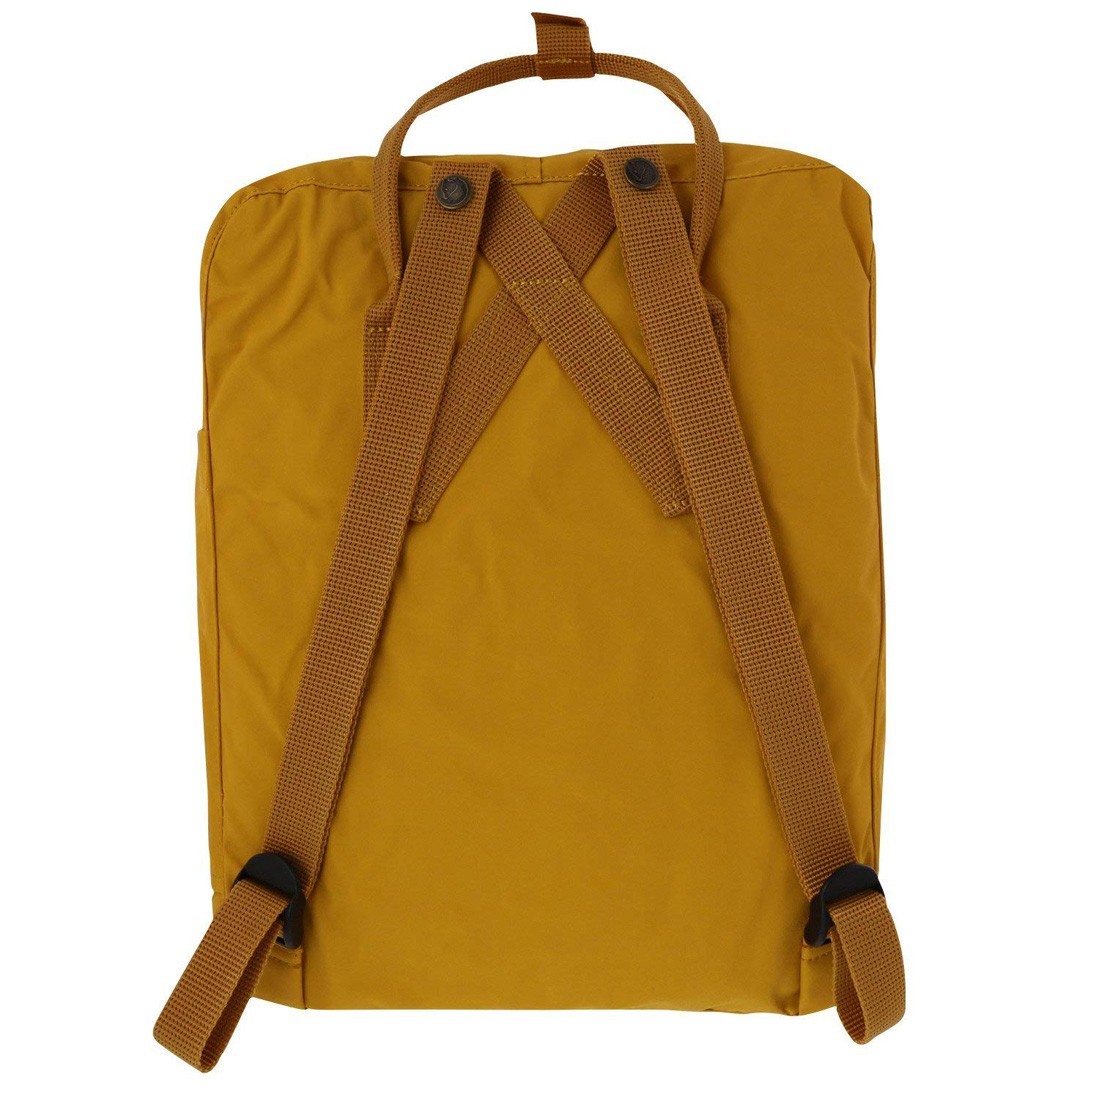 Shop Fjallraven Kanken Classic Backpack - Ochre - Fjallraven, delivered to  your home | TheOutfit